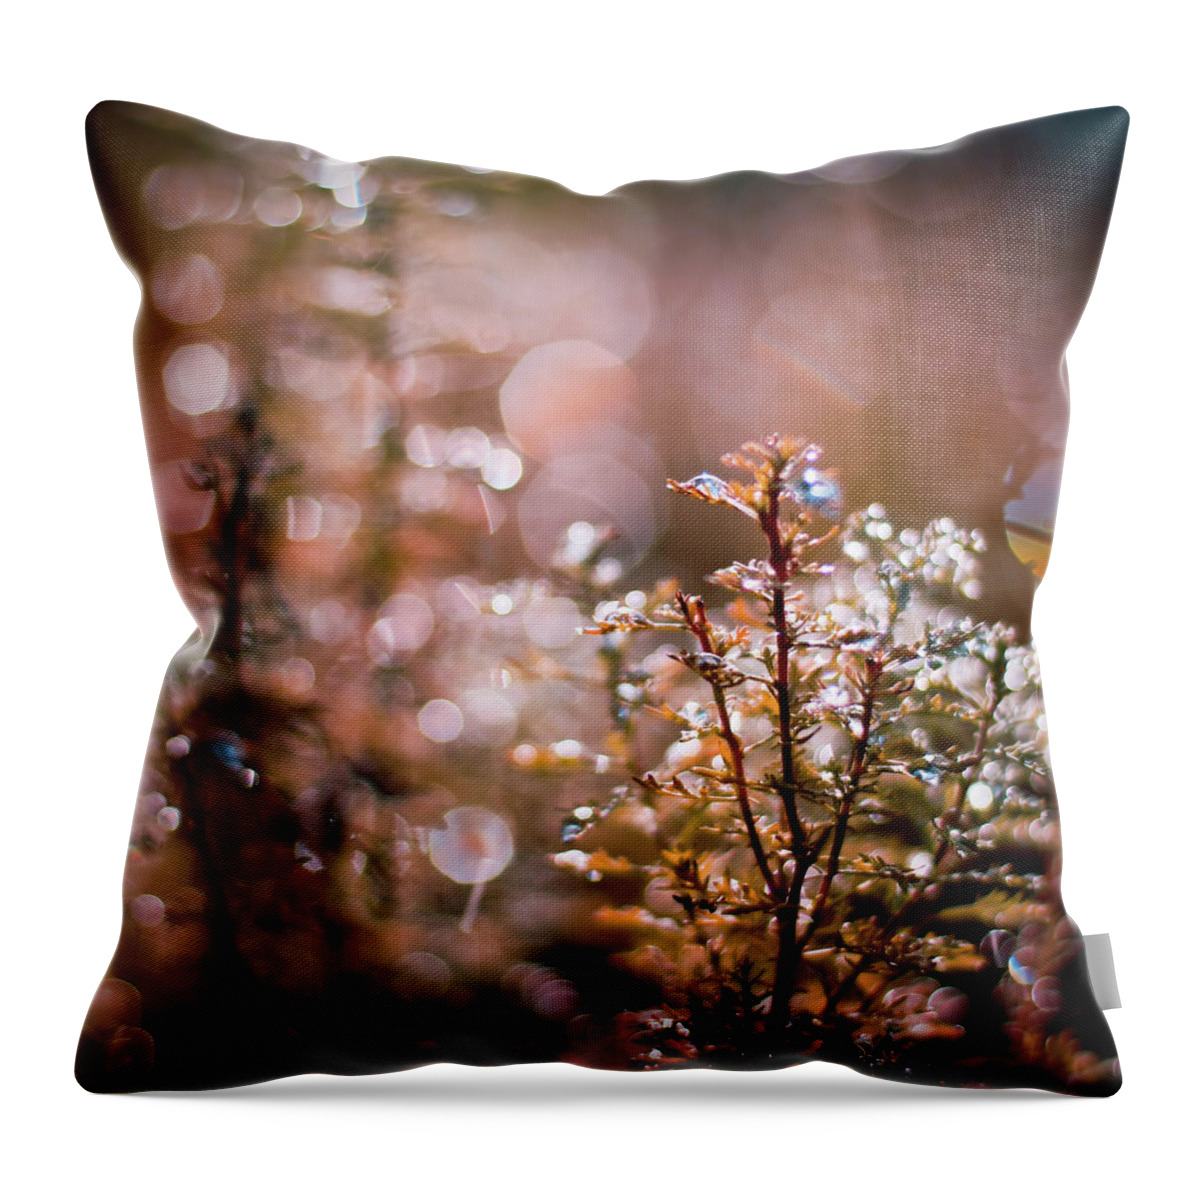 Outdoors Throw Pillow featuring the photograph Water Drops On Golden Plant by (c) Harold Lloyd